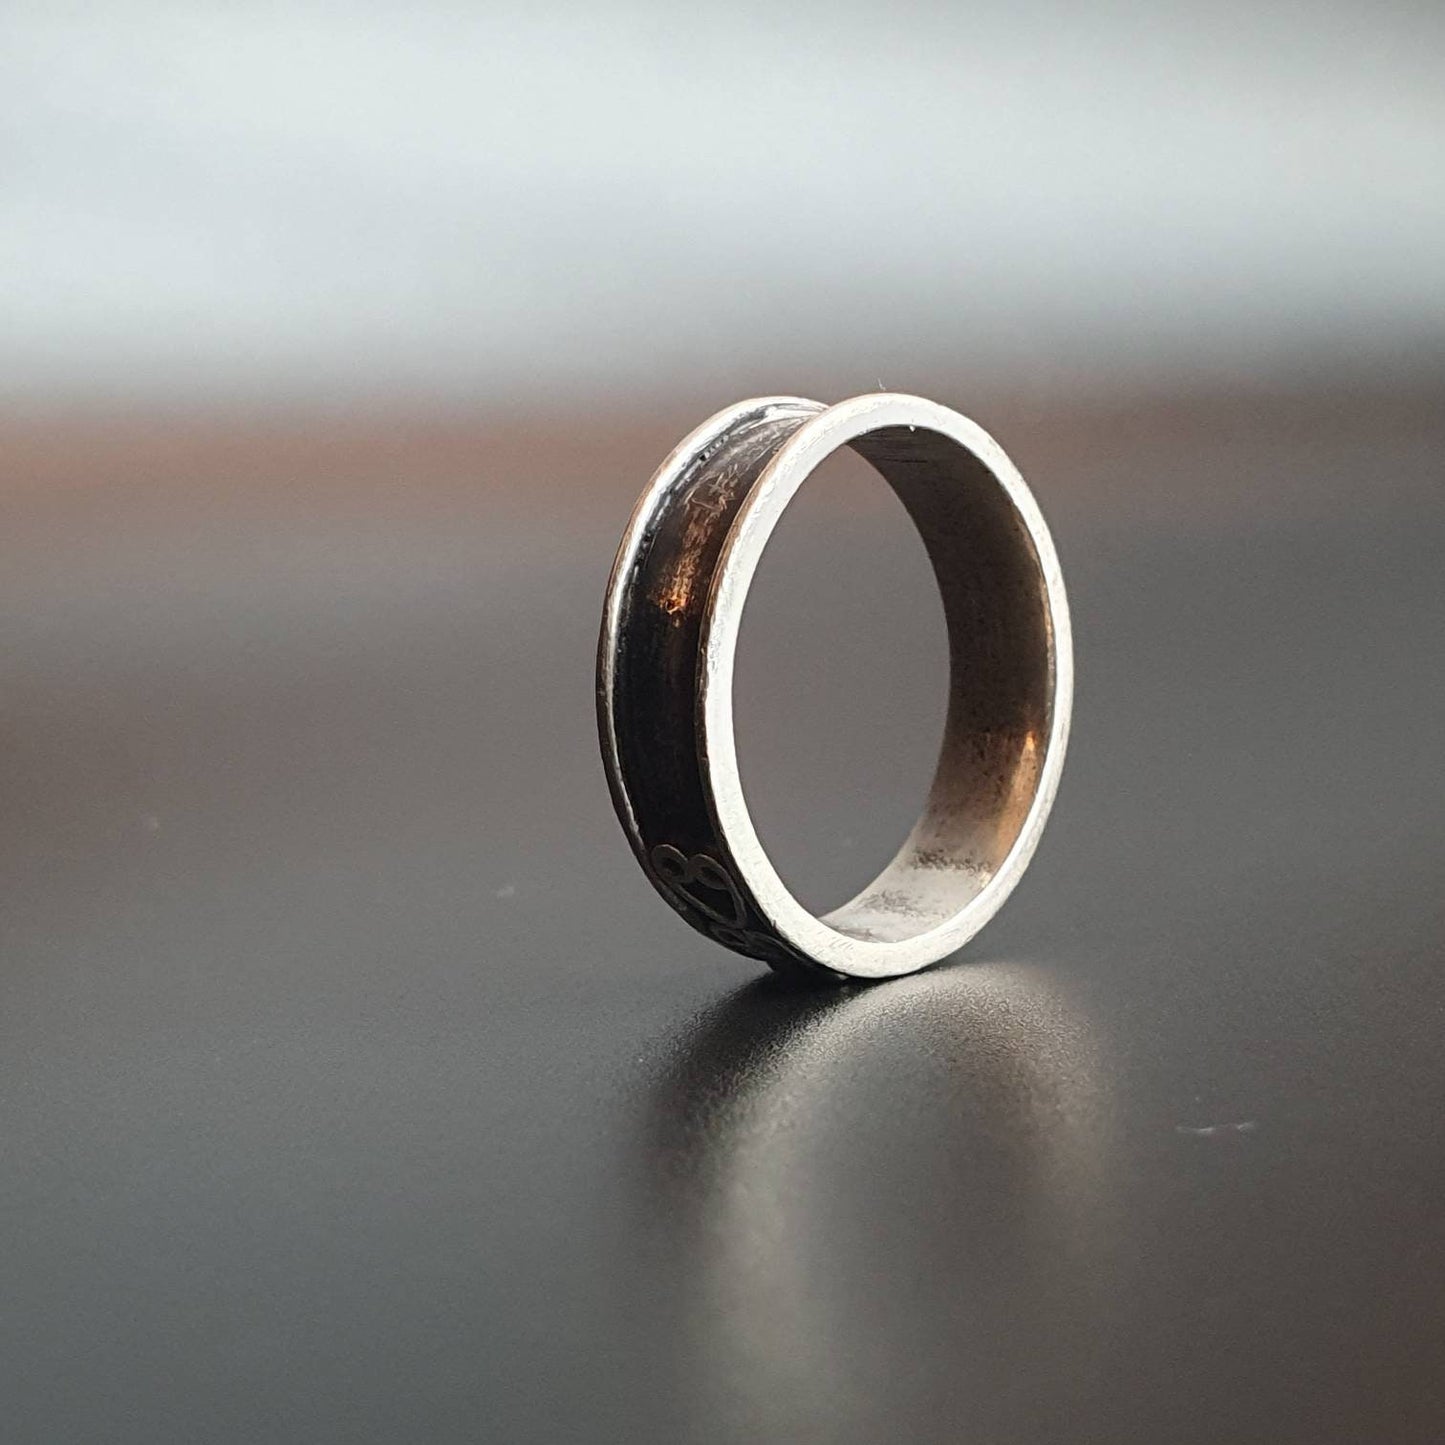 Band ring, sterling silver ring, statement ring, thumb ring, men's ring, handmade, vintage jewelry, unique gift, sterling jewelry, unisex